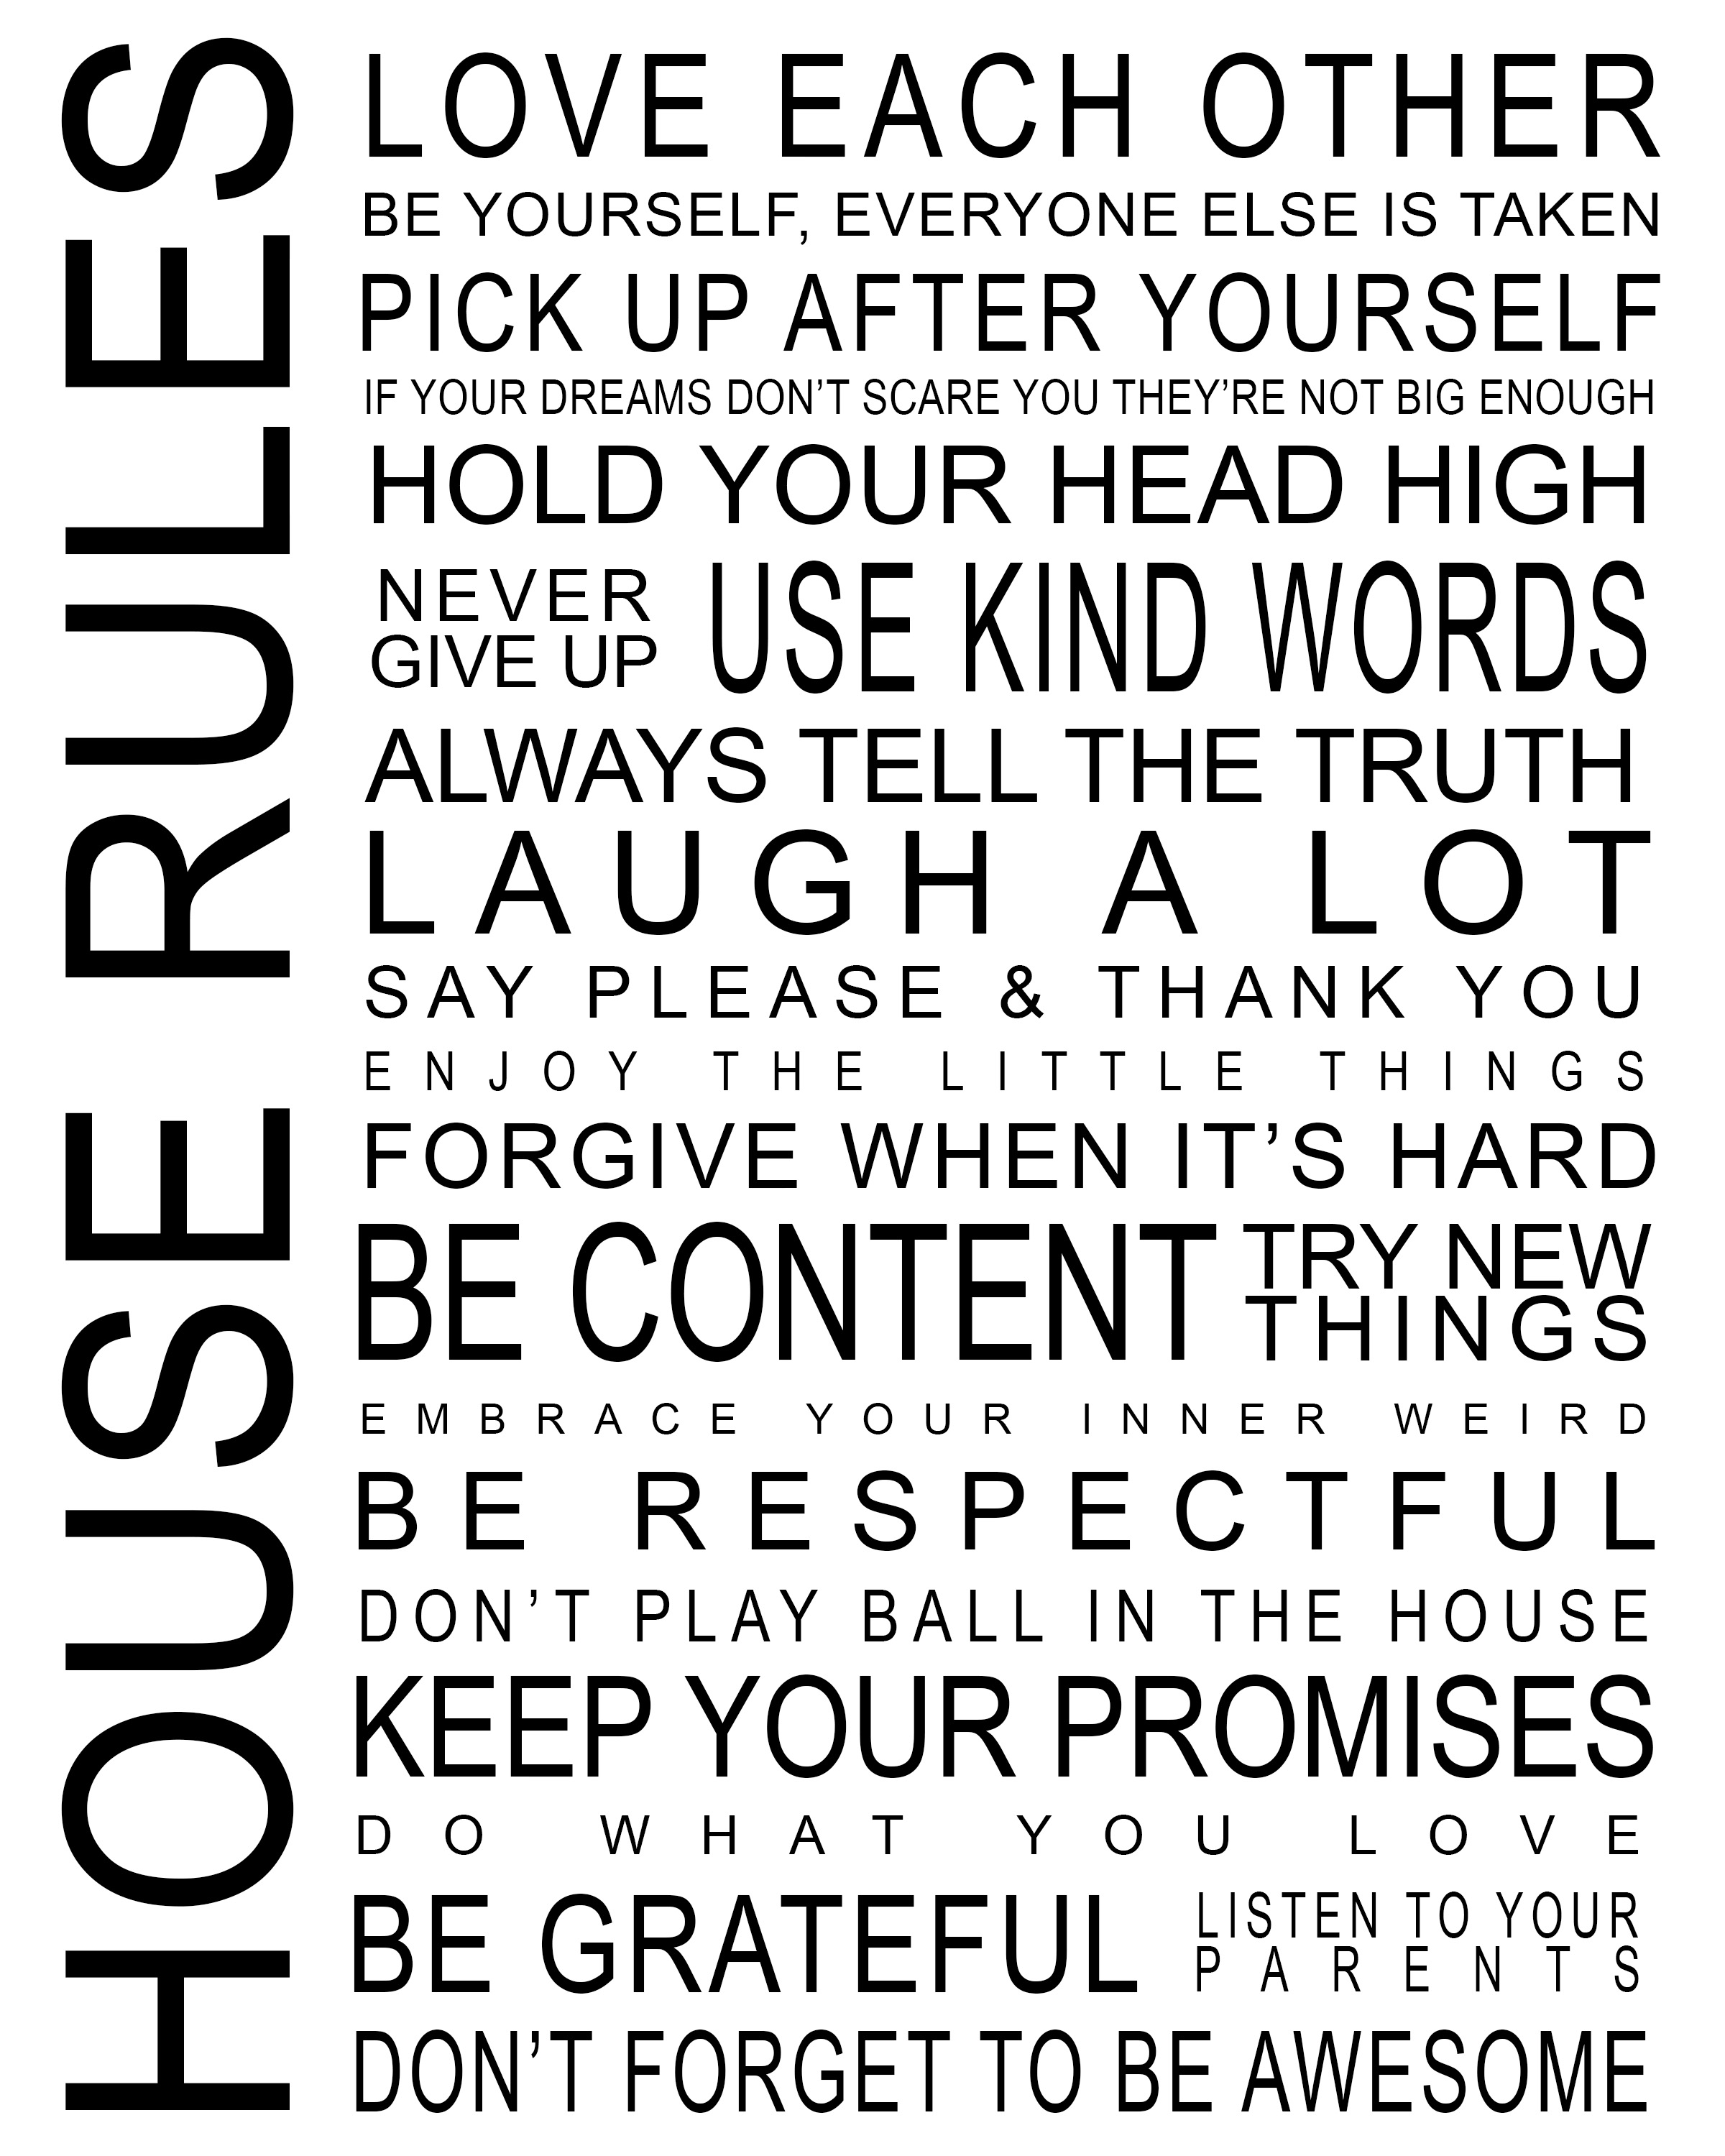 family rules clipart - photo #36